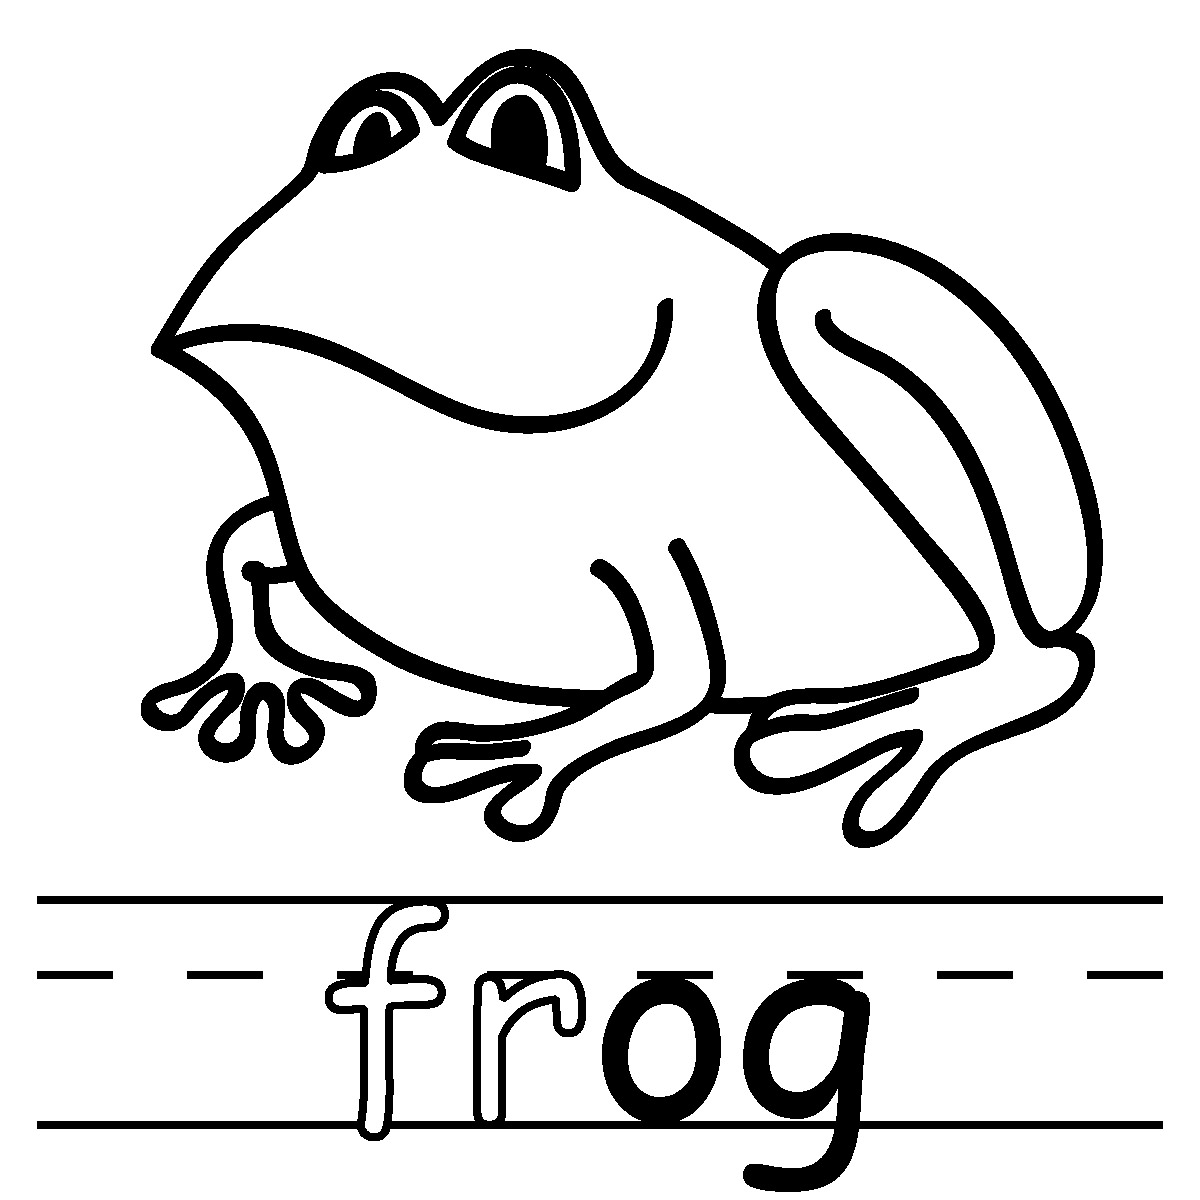 frog clipart black and white 3